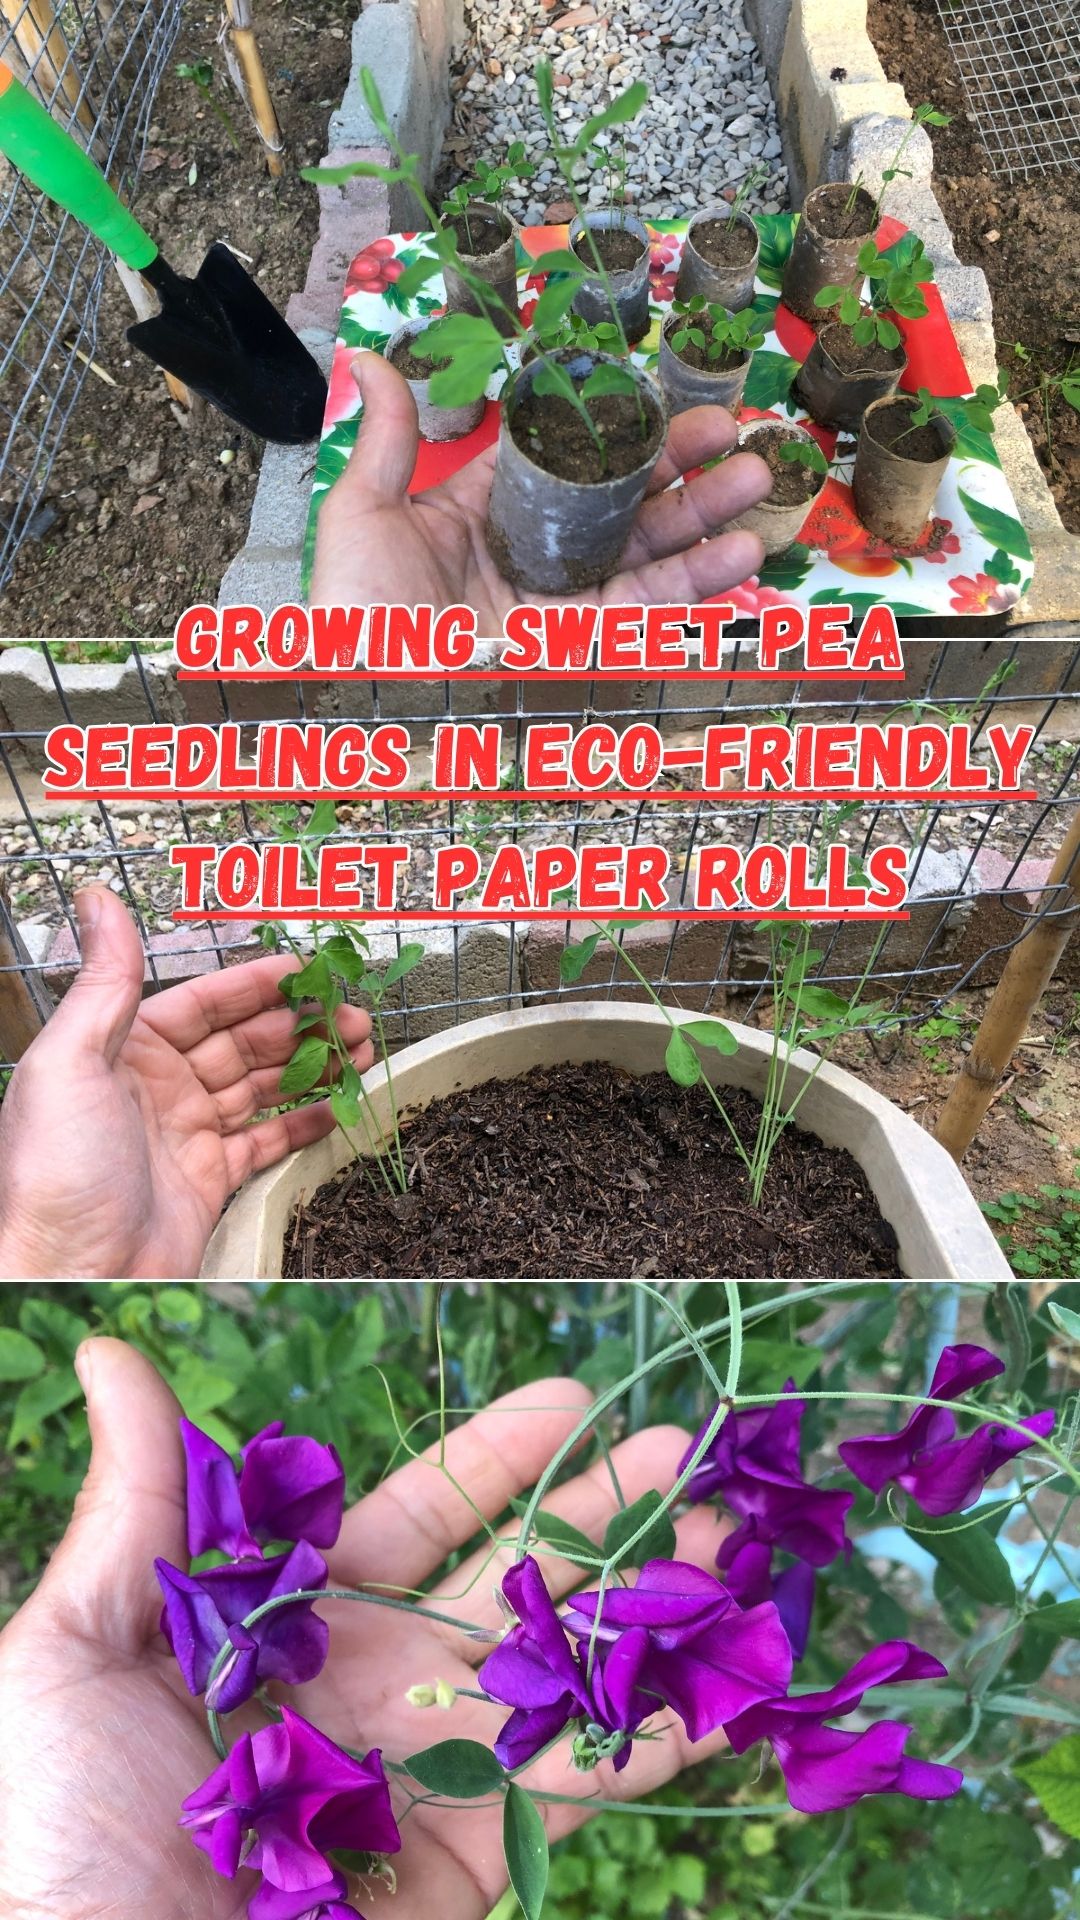 Embark on a journey of enchantment in the realm of gardening by watching our newest instructional video! Gain knowledge on how to cultivate sweet pea seedlings that were initially nurtured in environmentally friendly toilet paper rolls